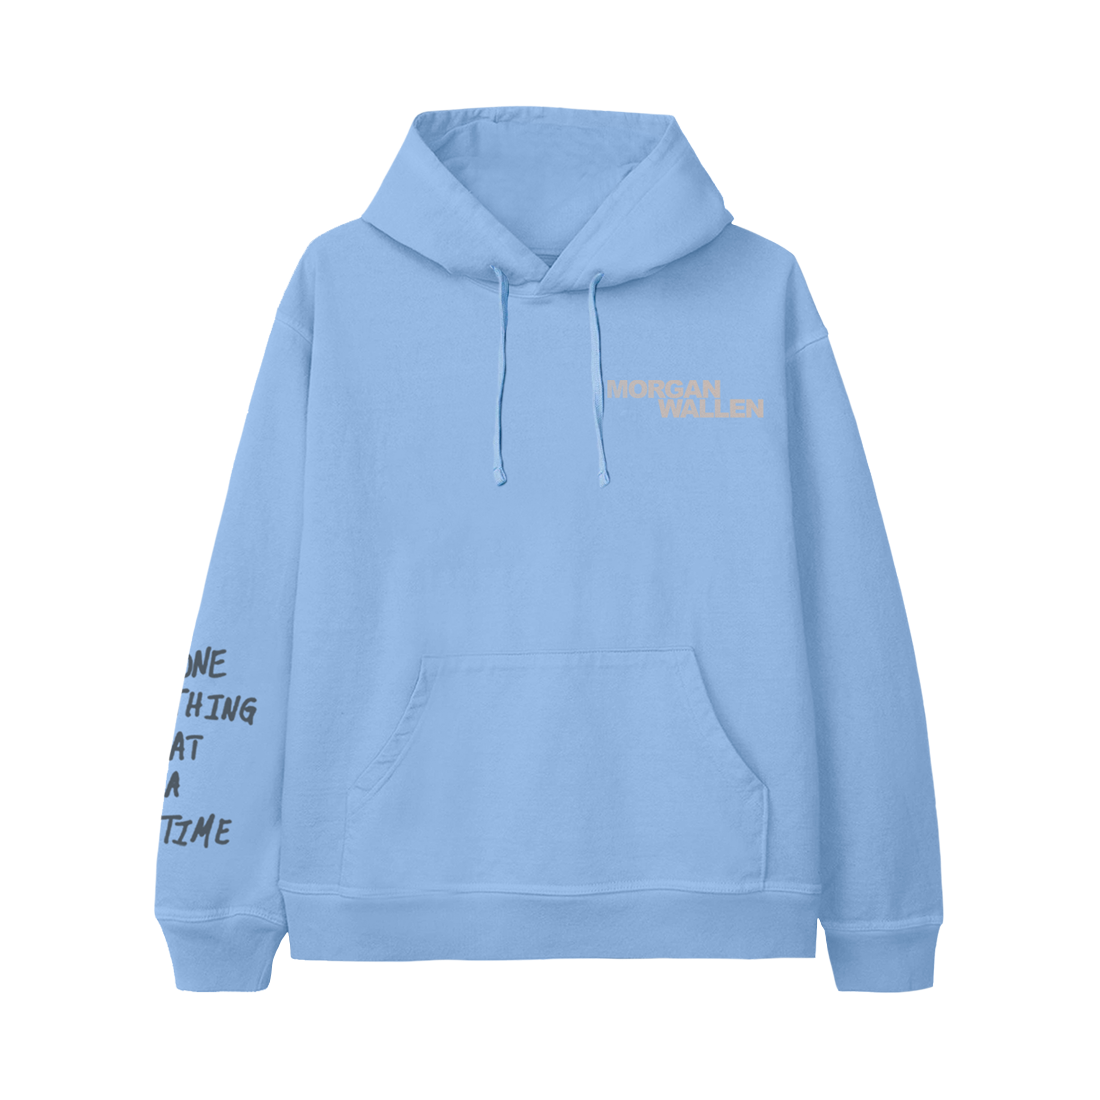 Morgan Wallen - One Thing At A Time Album Cover Blue Hoodie